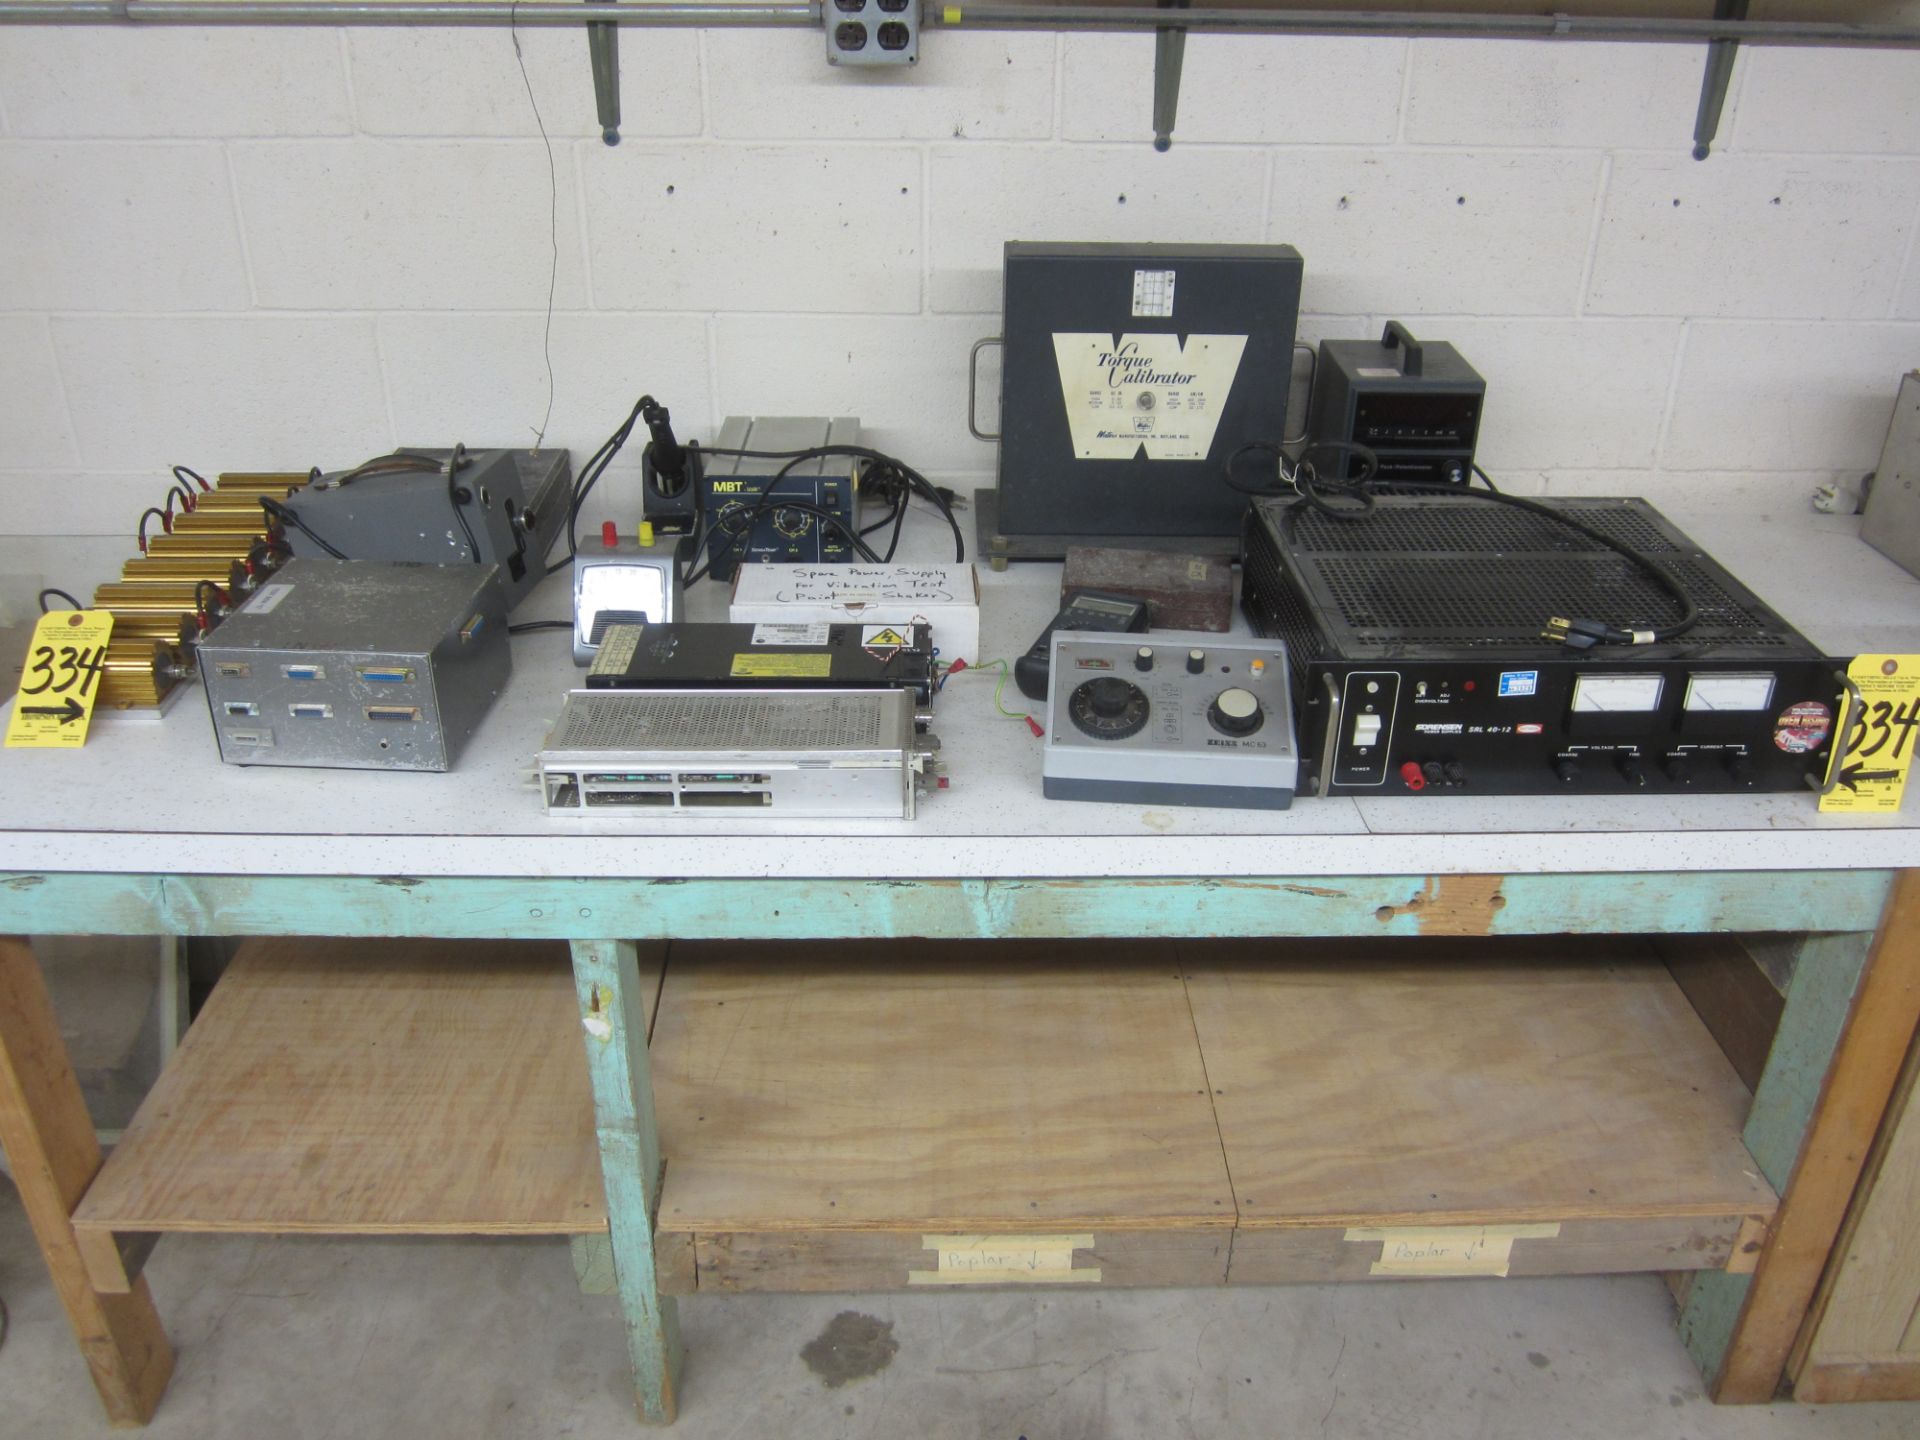 Lot of Miscellaneous Electrical Items on Shop Table